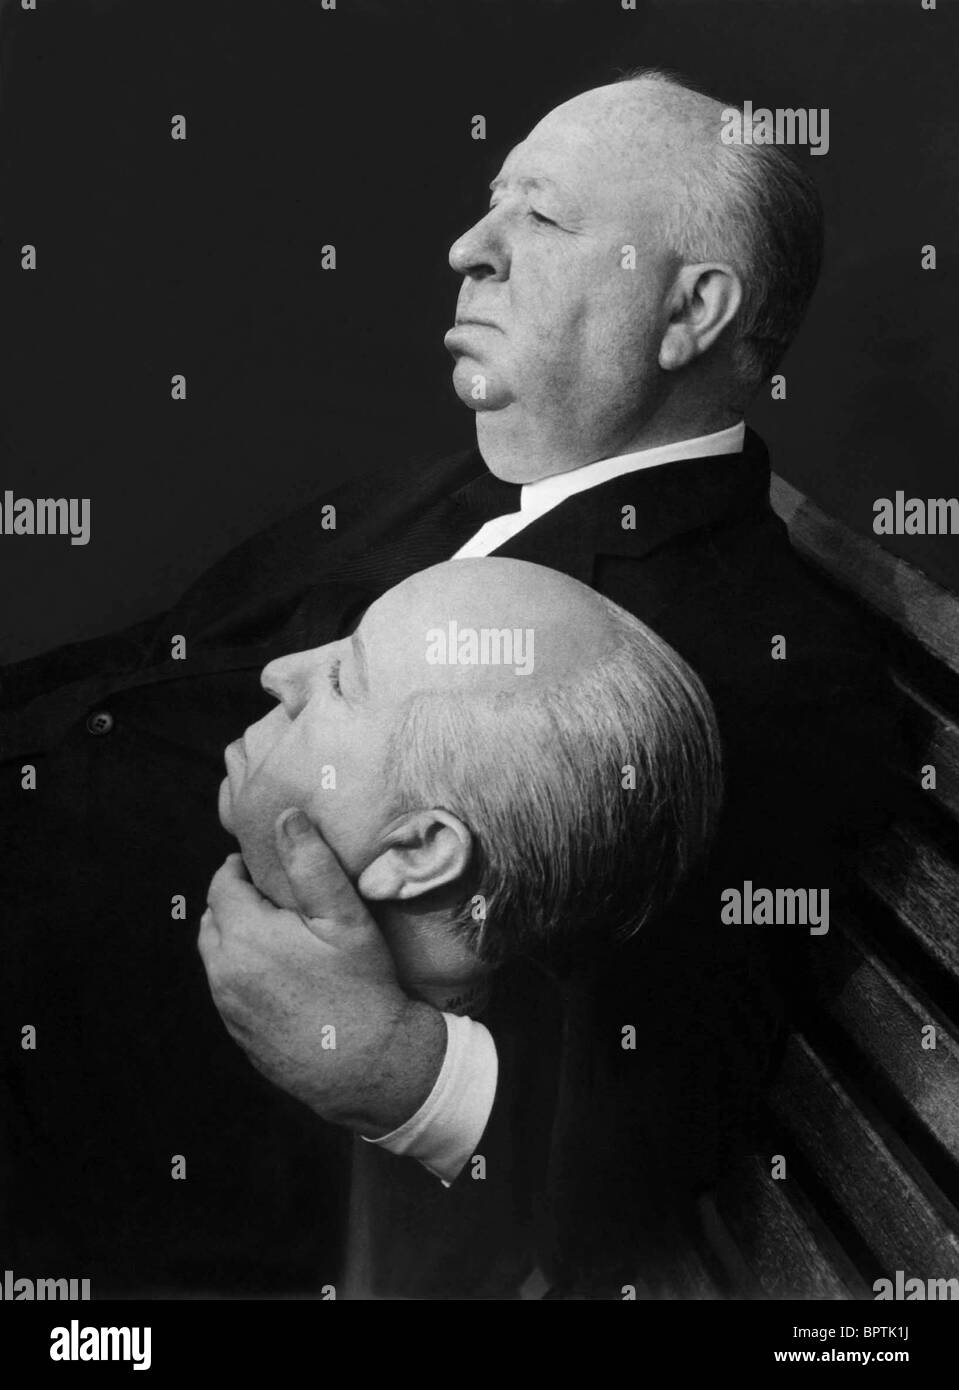 ALFRED HITCHCOCK DIRECTOR (1973) Stock Photo